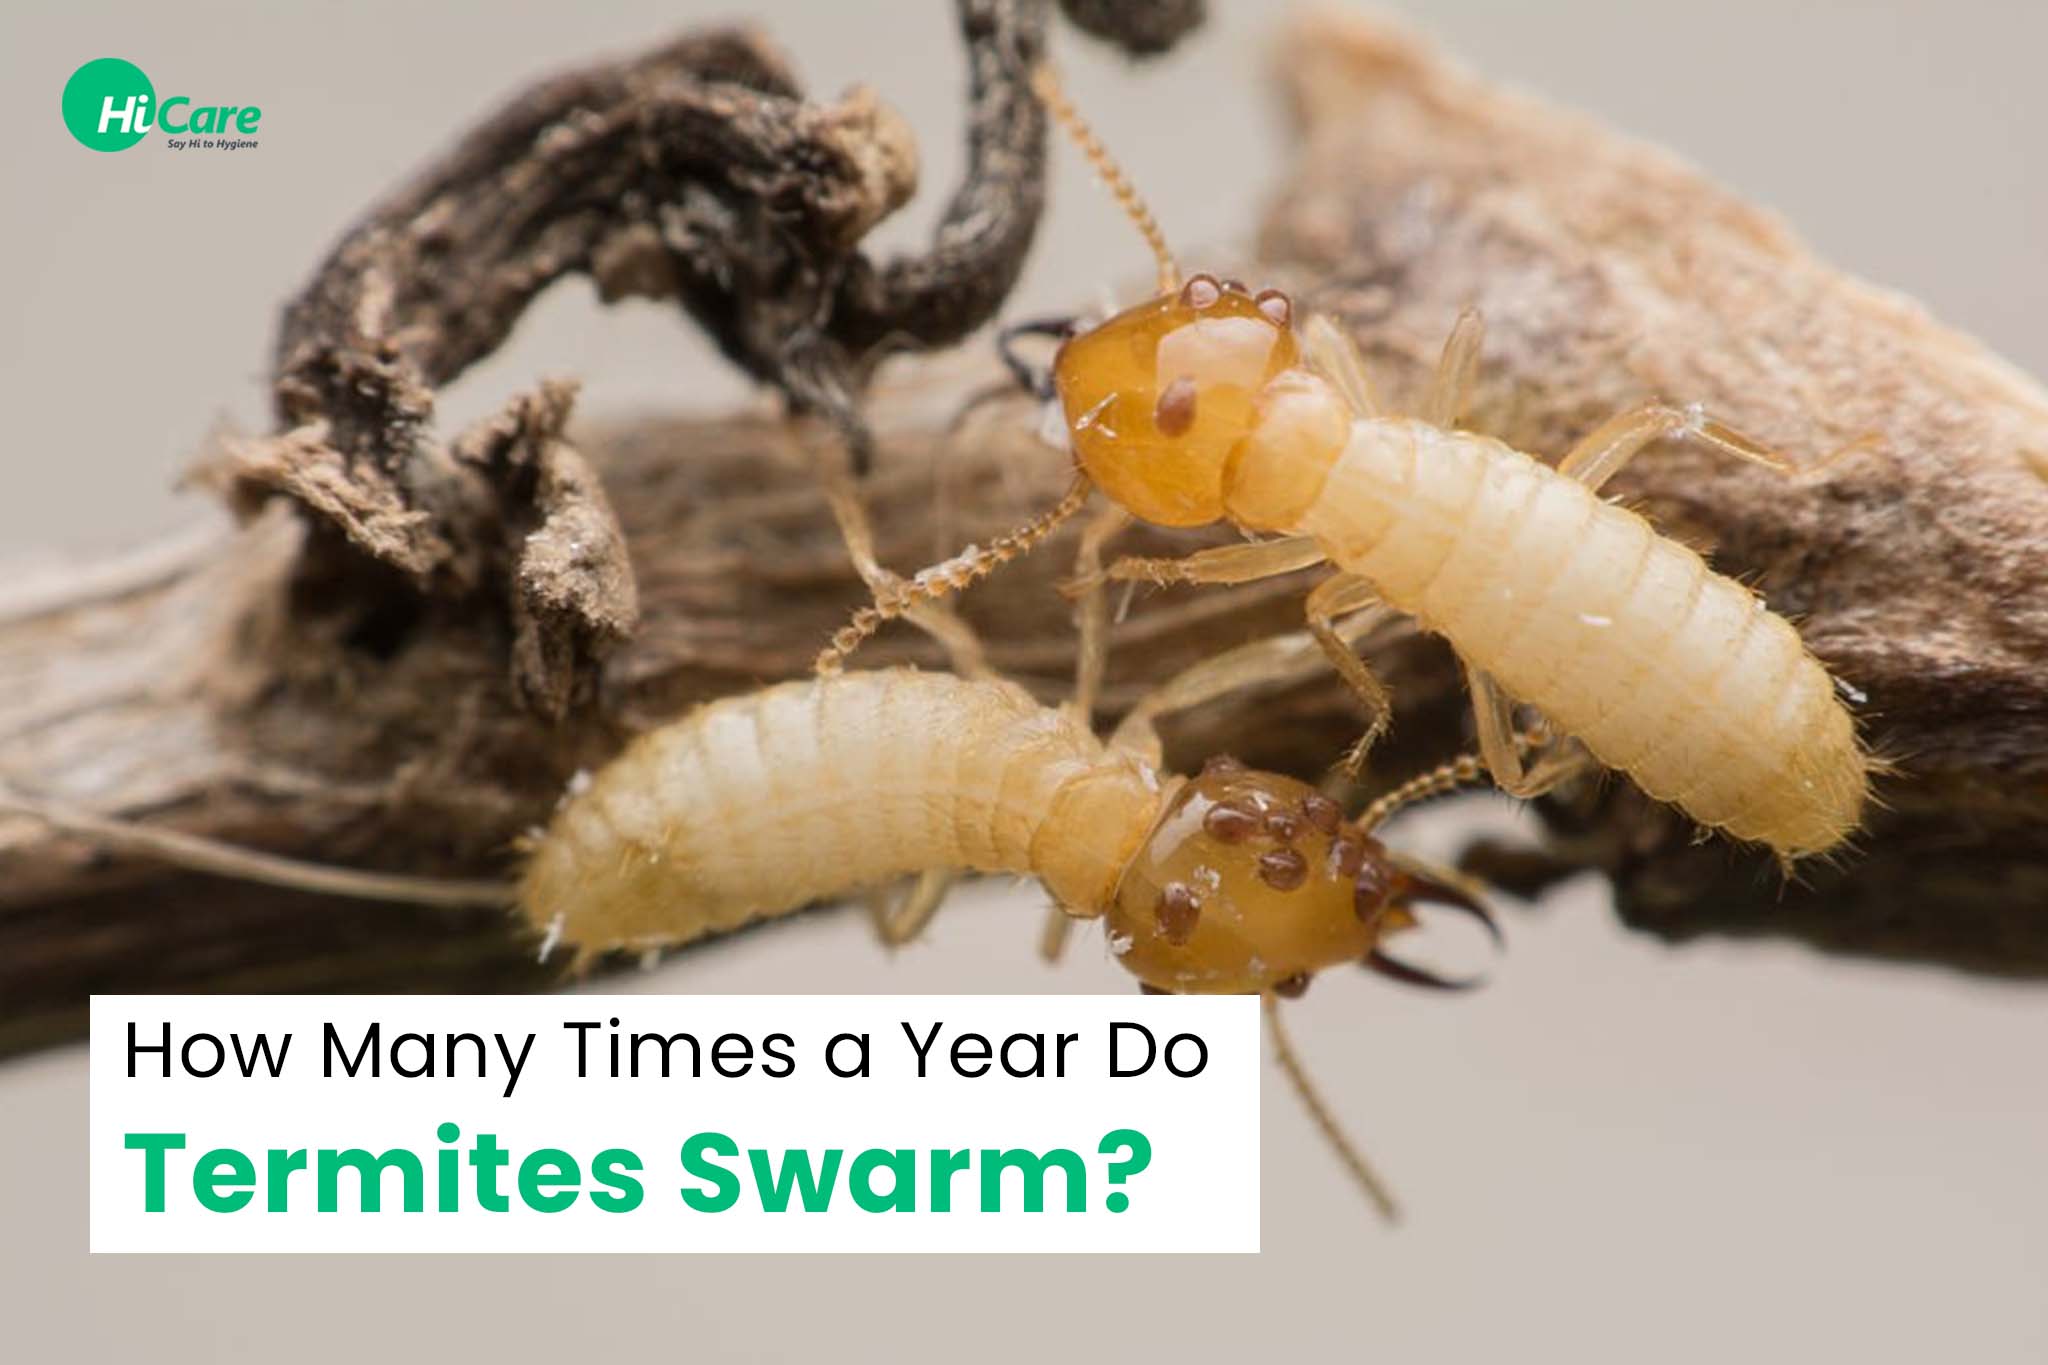 How Many Times a Year Do Termites Swarm?